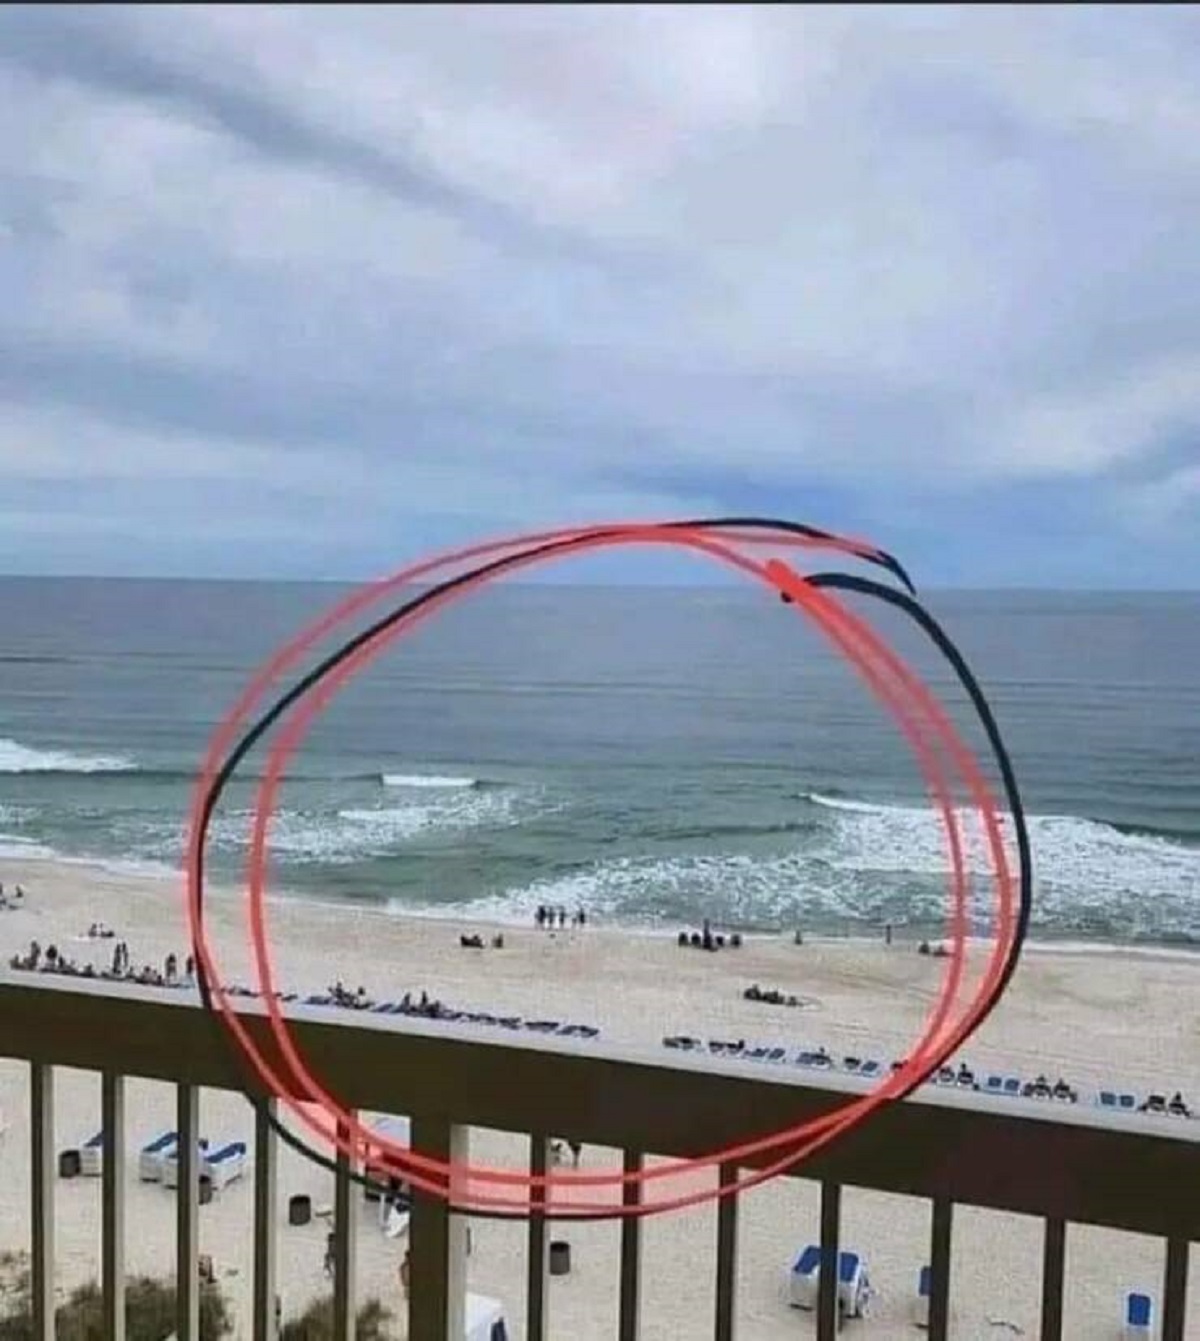 This is what a rip current looks like: